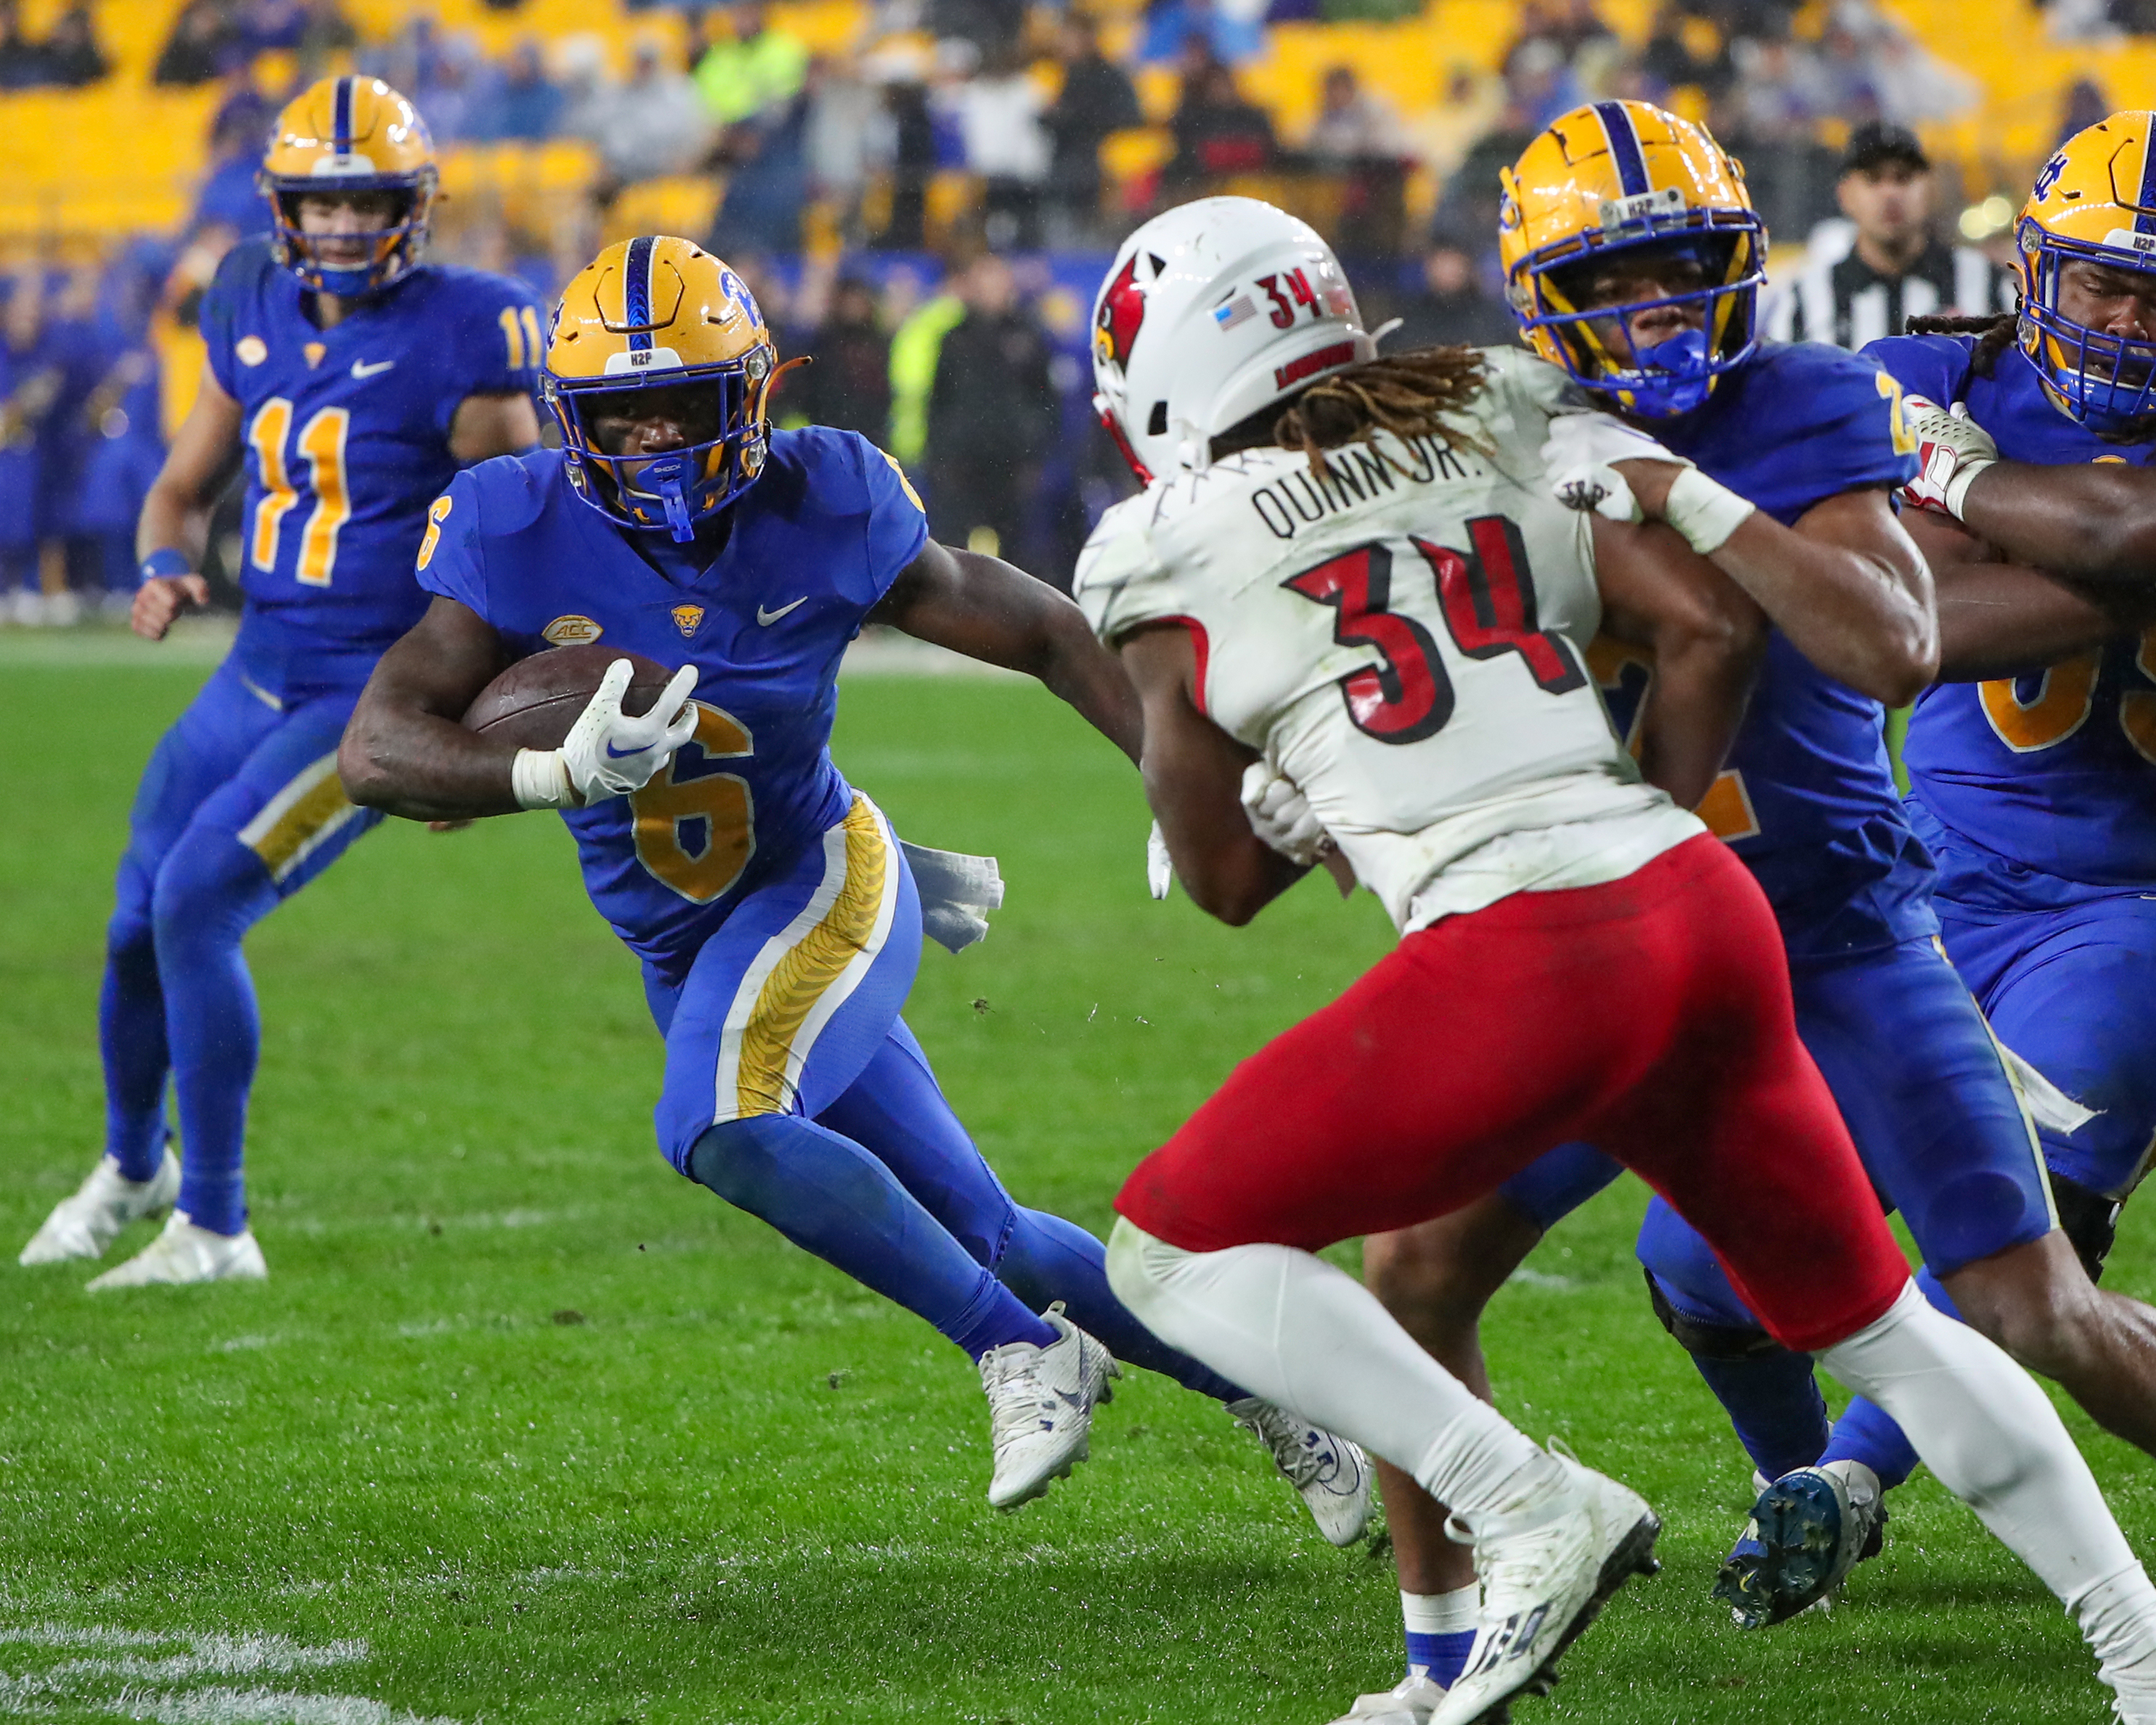 Louisville football vs. Pitt: Photos from ACC college football game